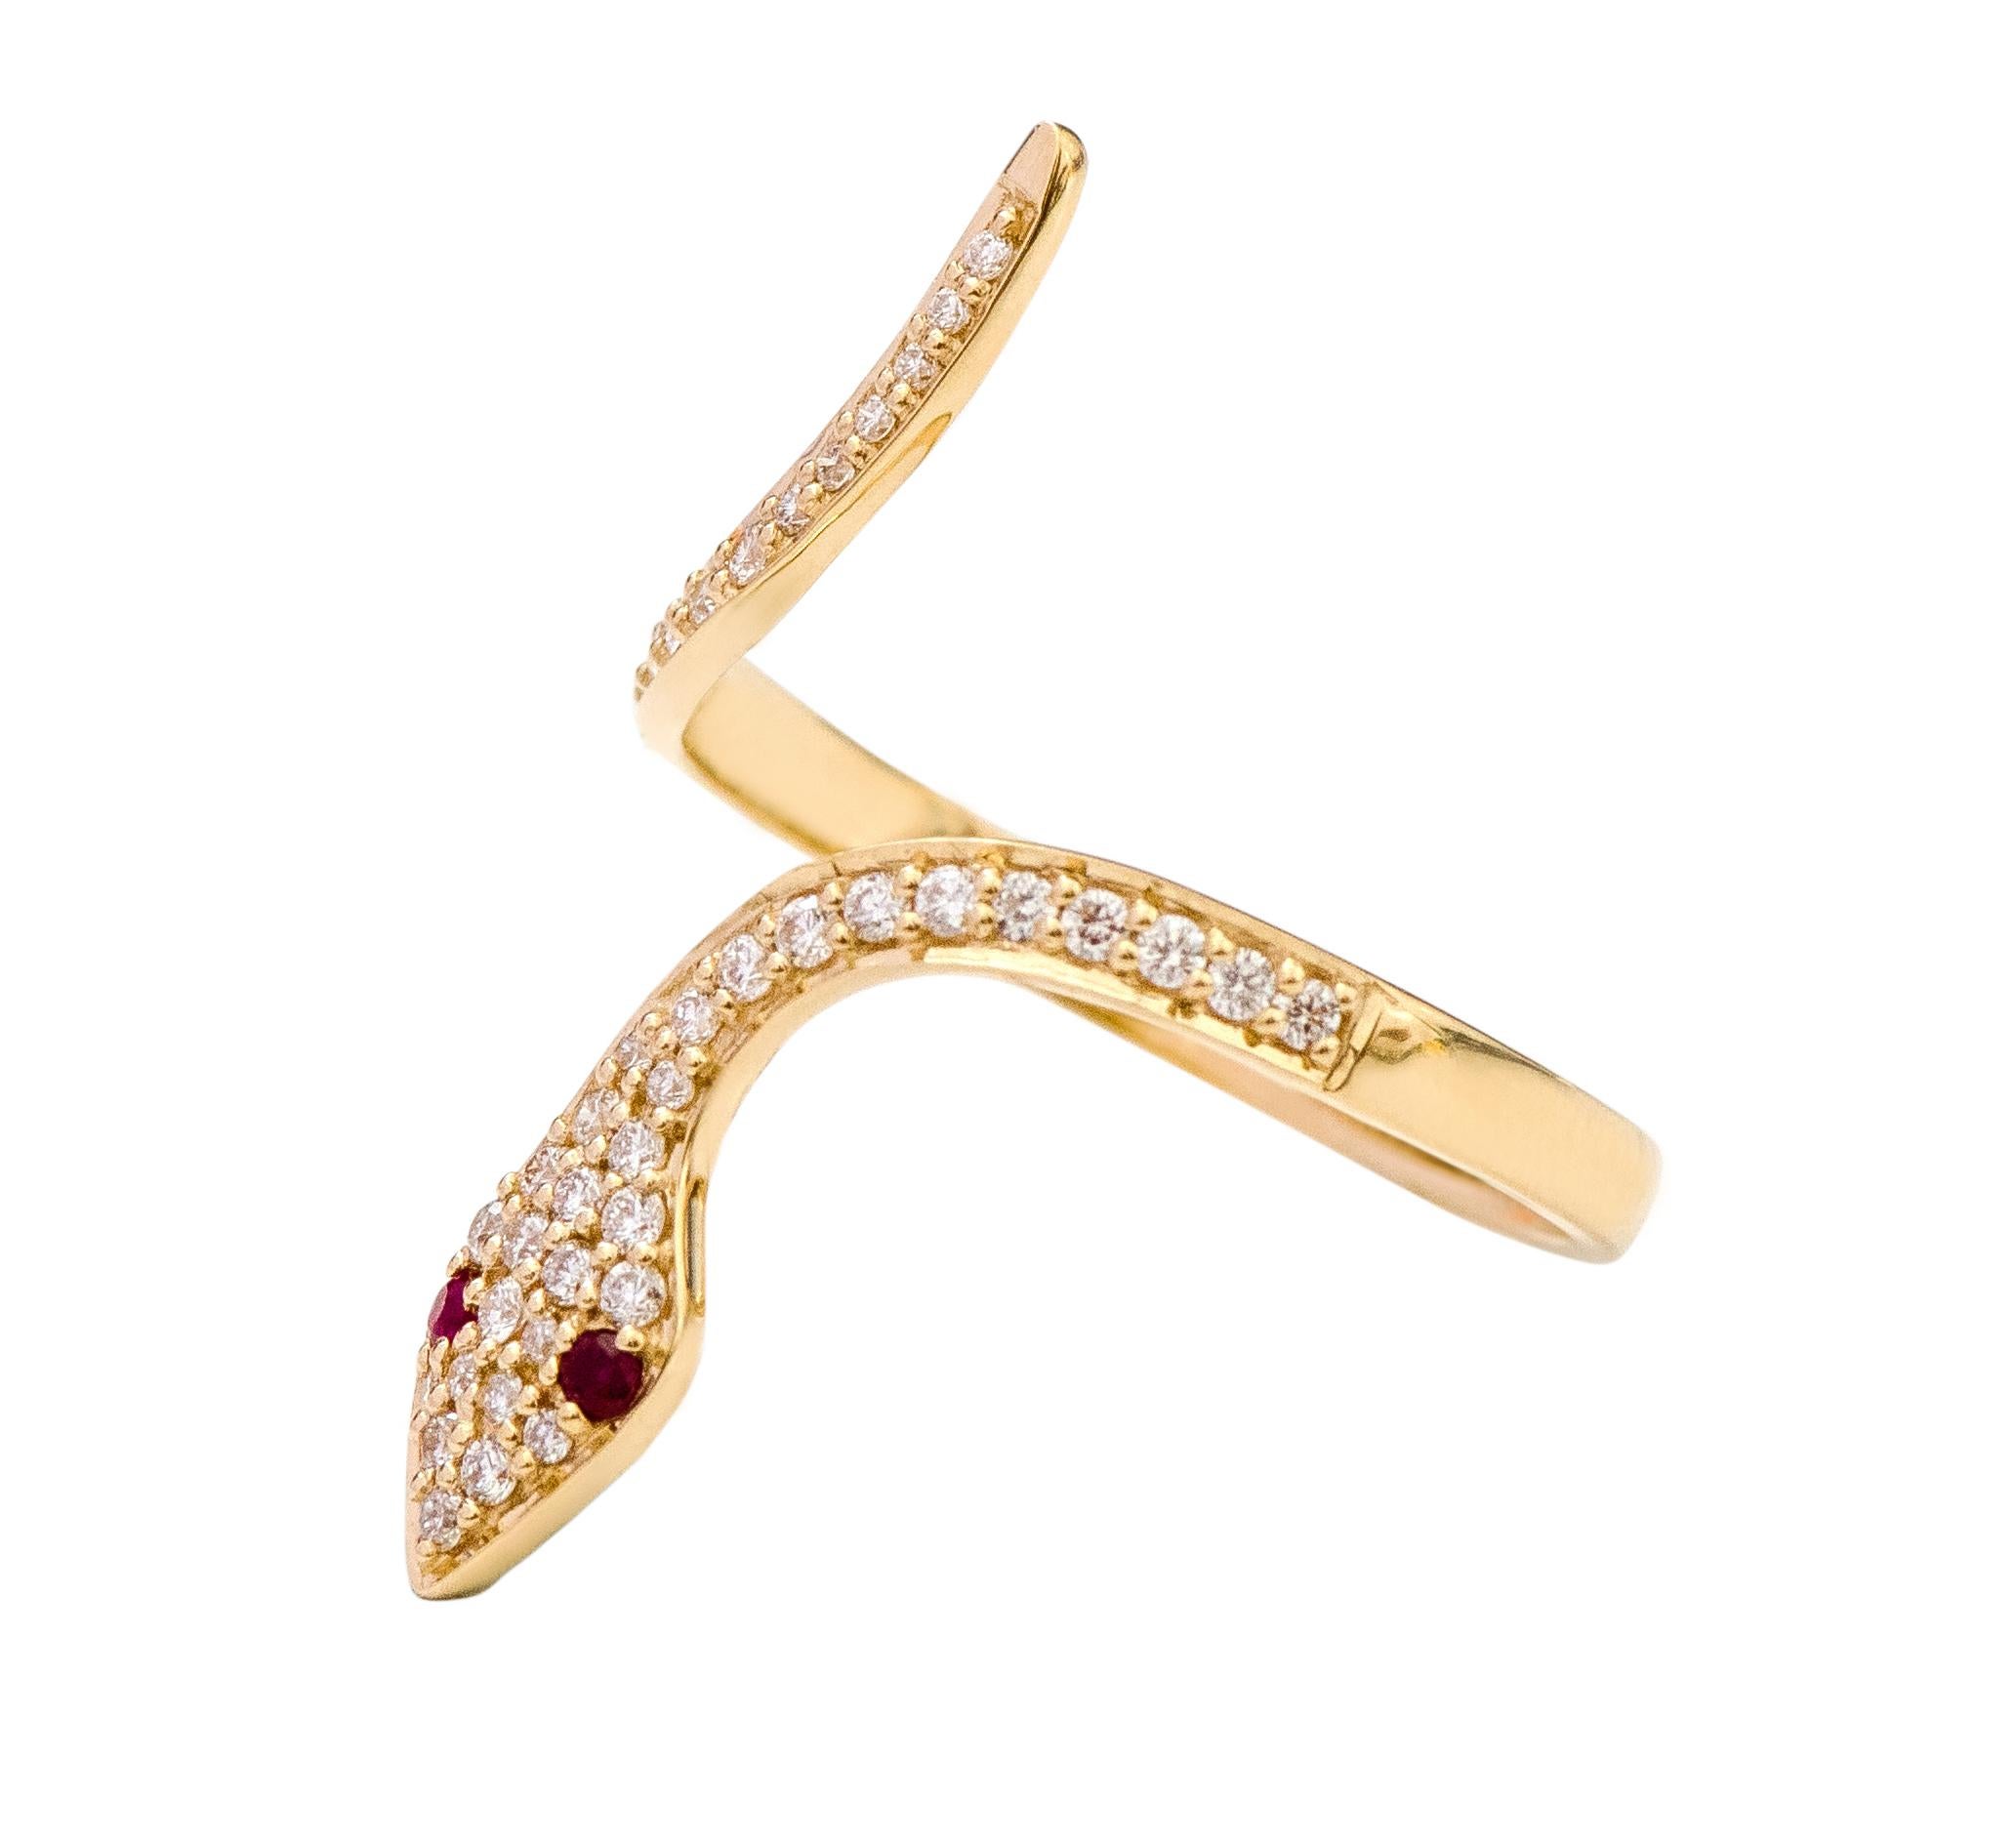 18 Karat Yellow Gold Snake Serpent Diamond and Ruby Ring 

This visceral reptile snake zigzag ring is a simple version of the cocktail broad ring. It’s elegant to the extent that it can be worn daily with the touch of regality. 

The small pave